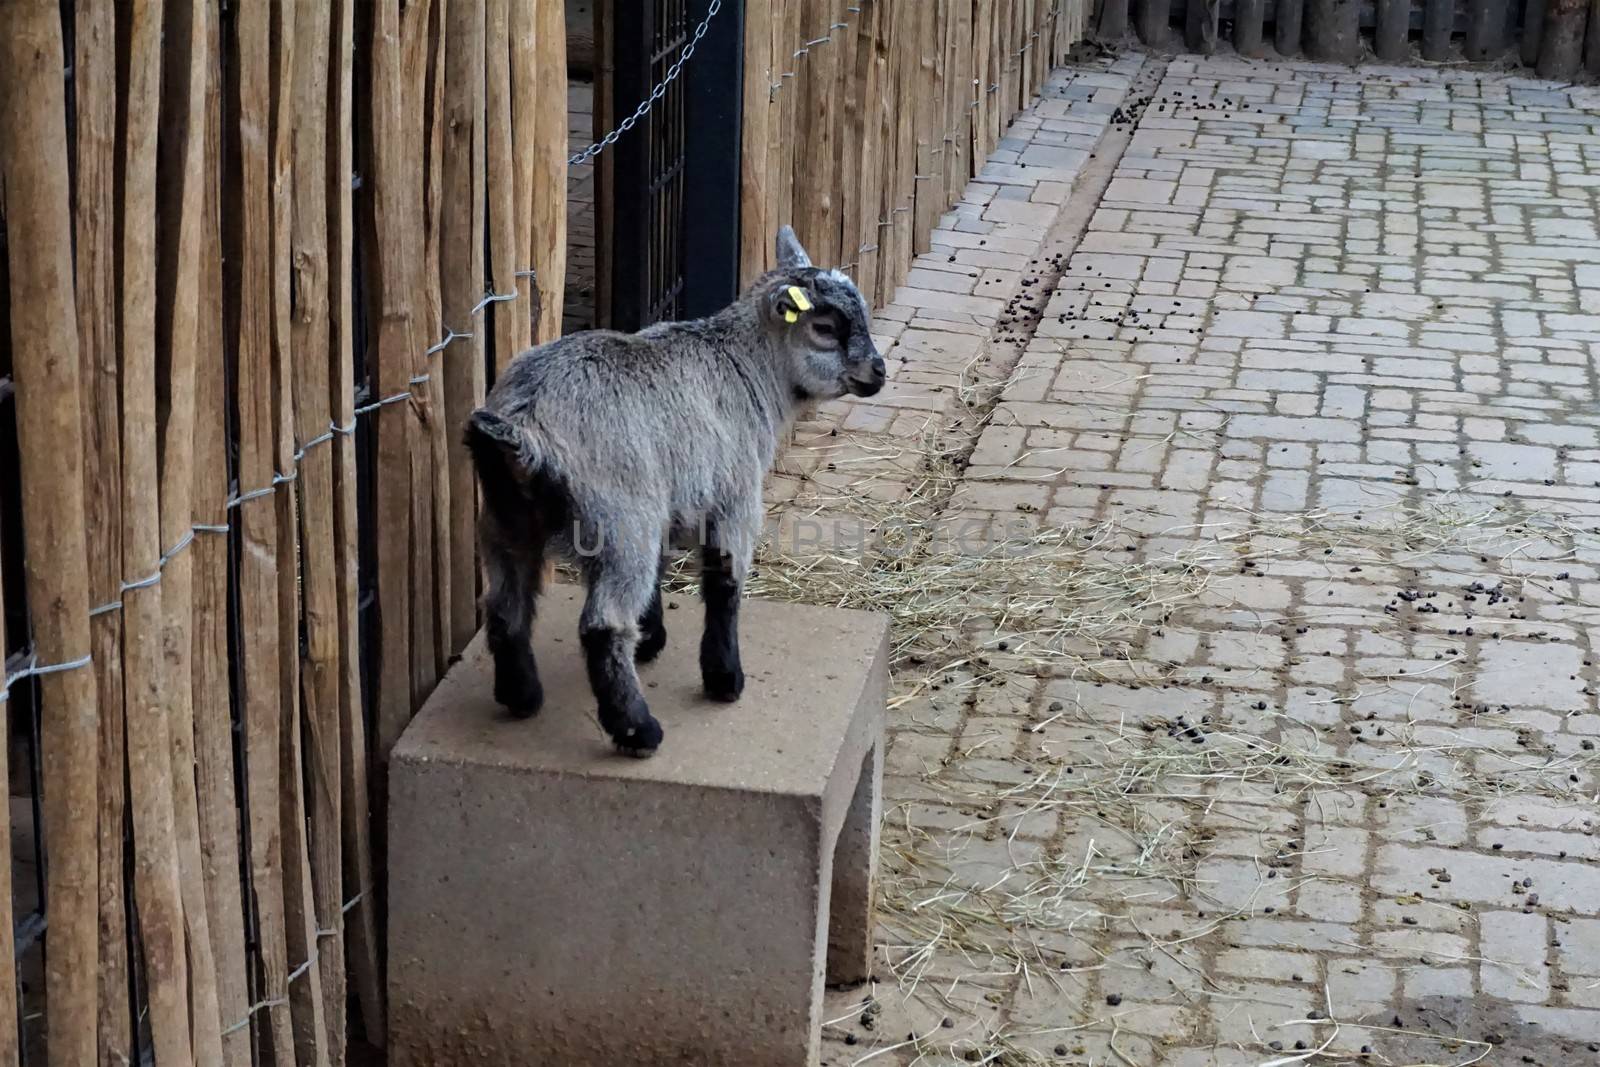 Cute baby goat standing on stone bench by pisces2386